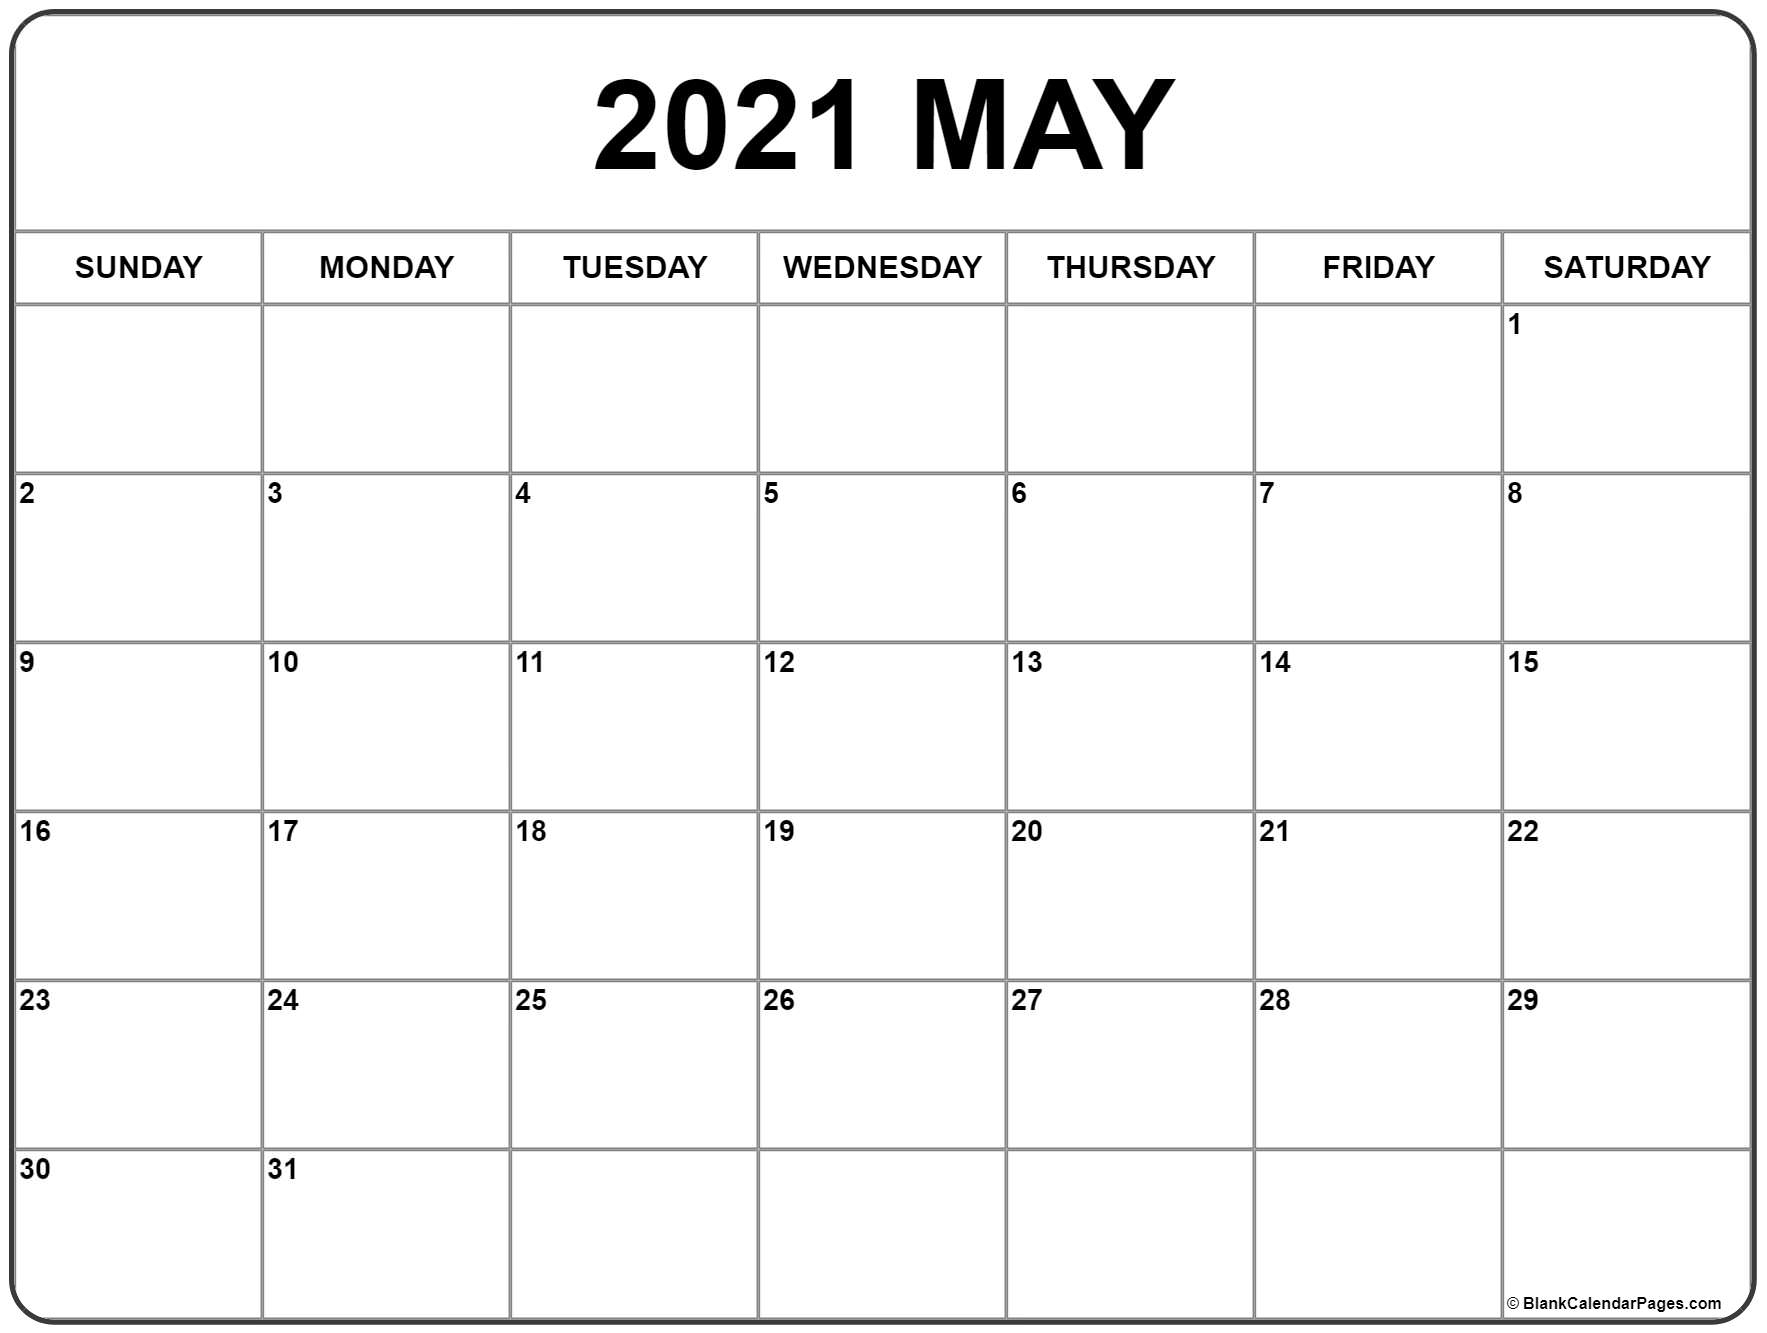 Collect 2021 Calendar Month By Month Free Printable